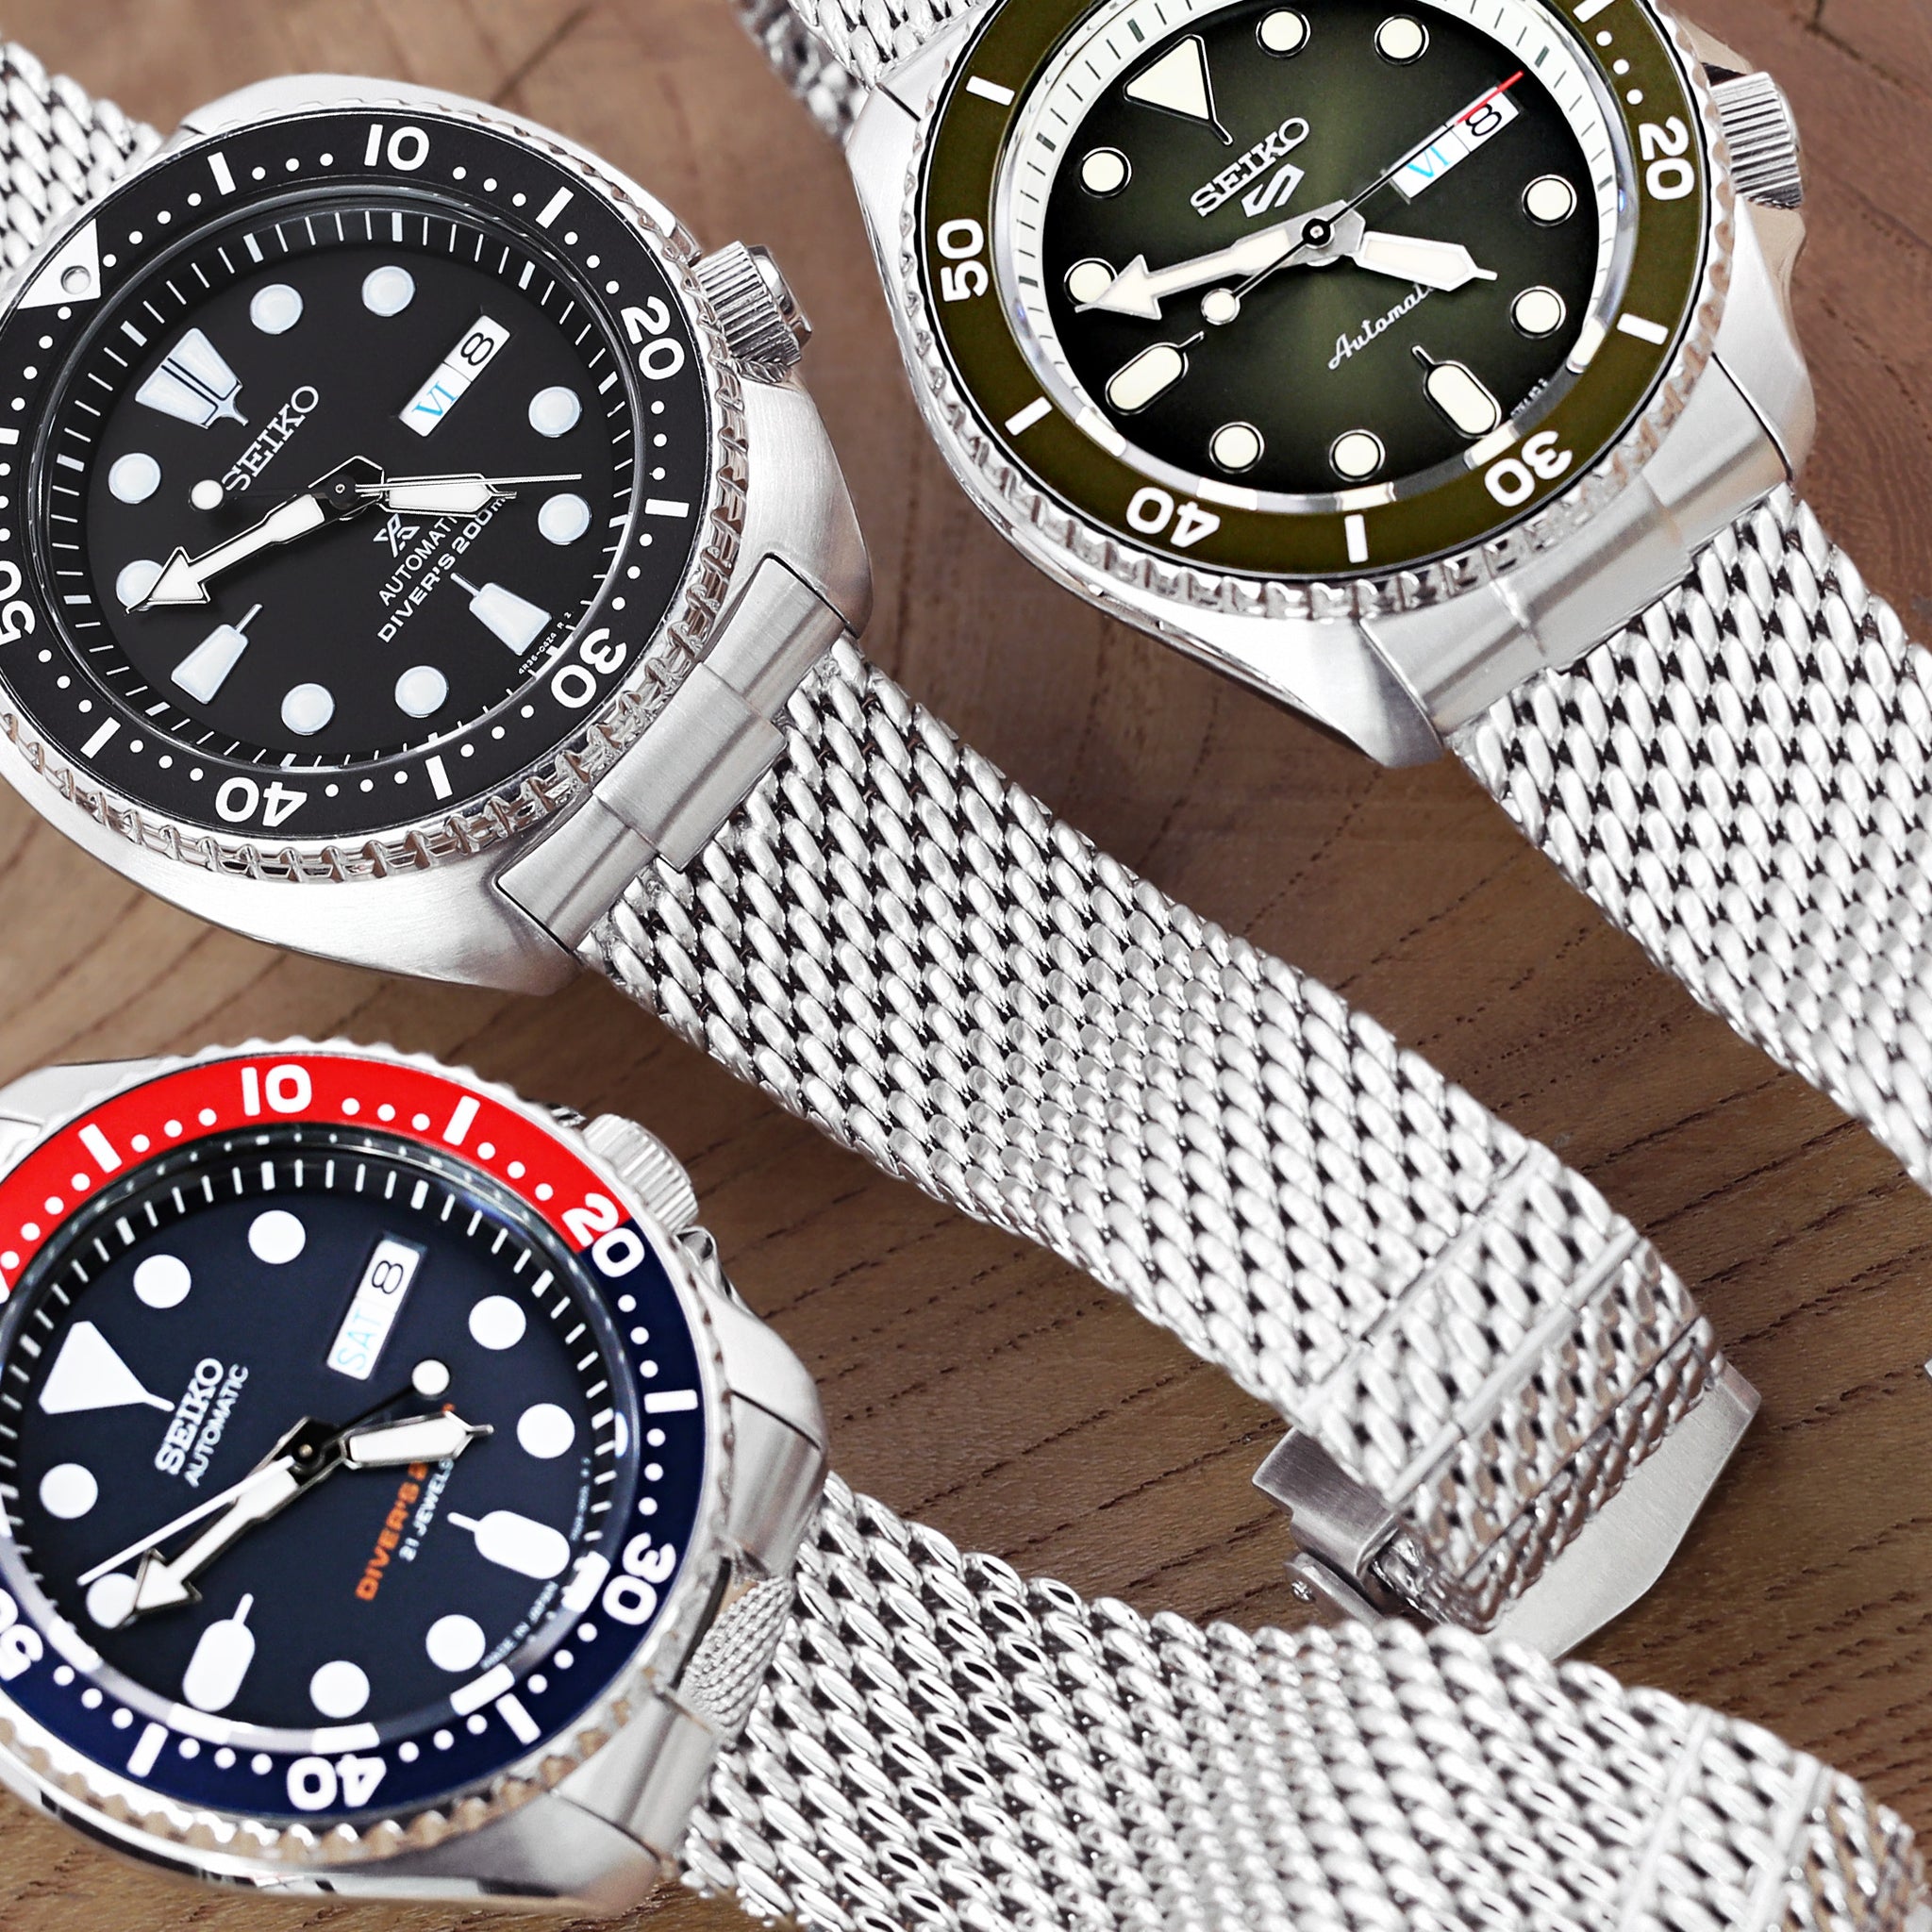 Mesh and Match with Seiko SKX 007 & New Seiko 5 Sports Models